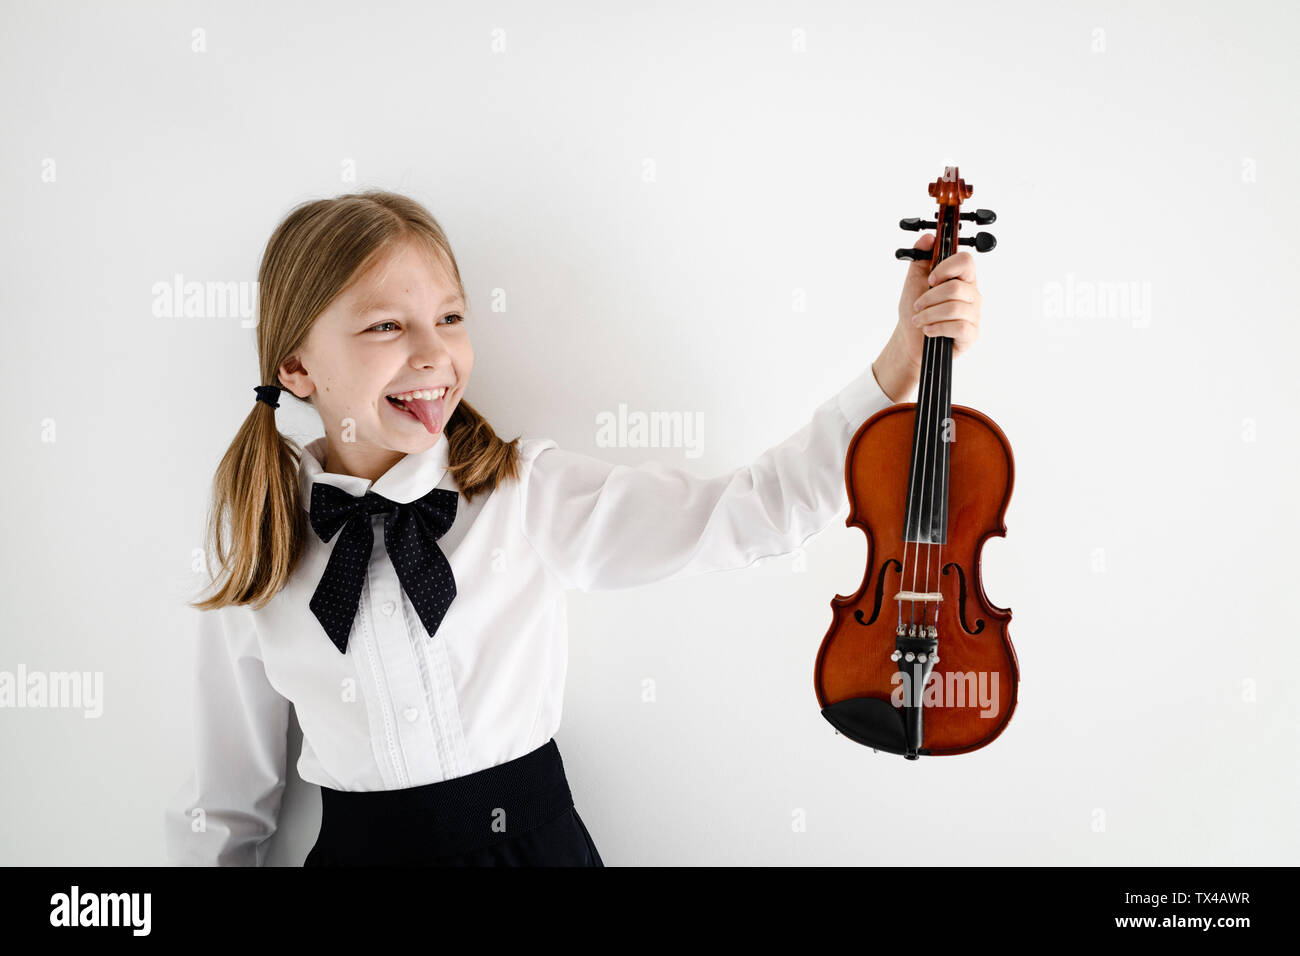 Funny girl holding a violin Stock Photo